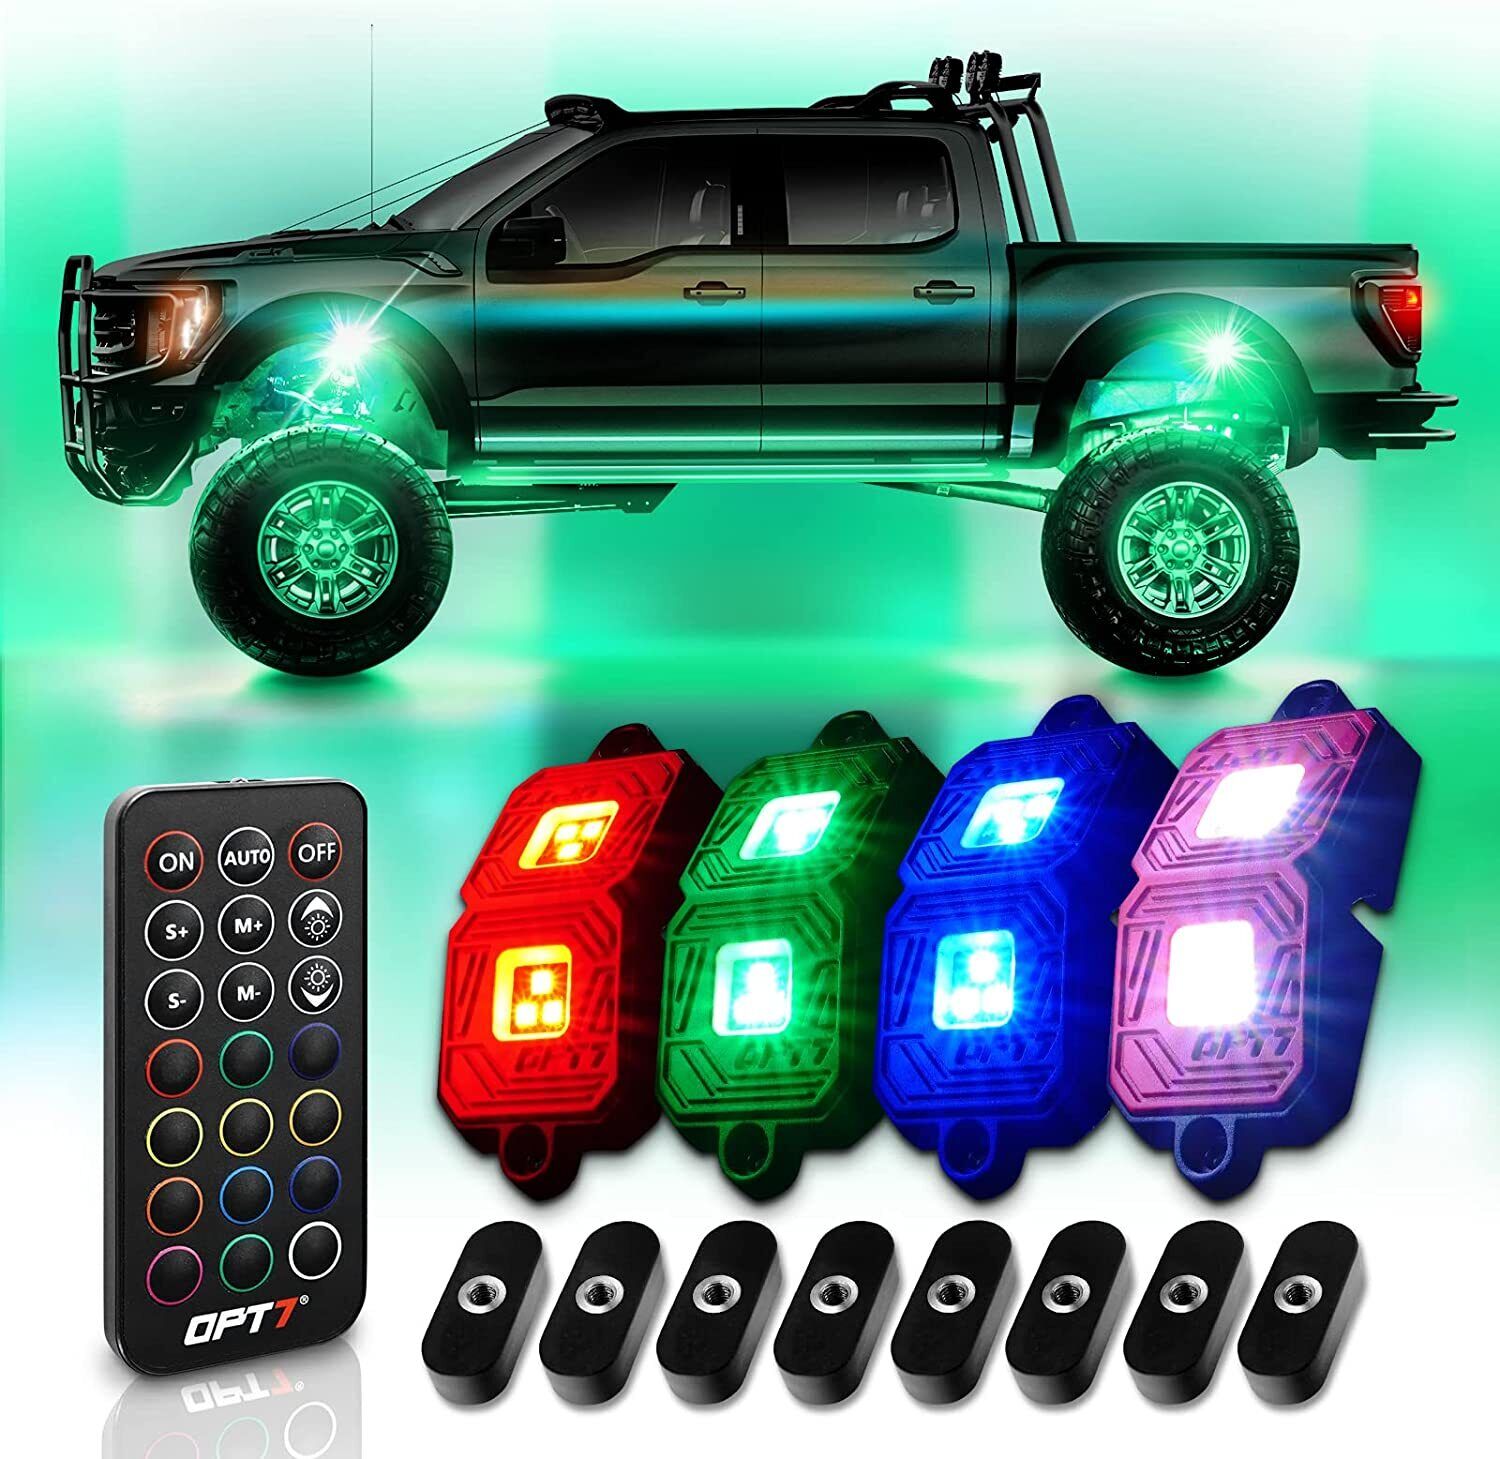 Underglow LED RGB Rock Light w/Remote w/Magnet Offroad Truck Car OPT7 Photon